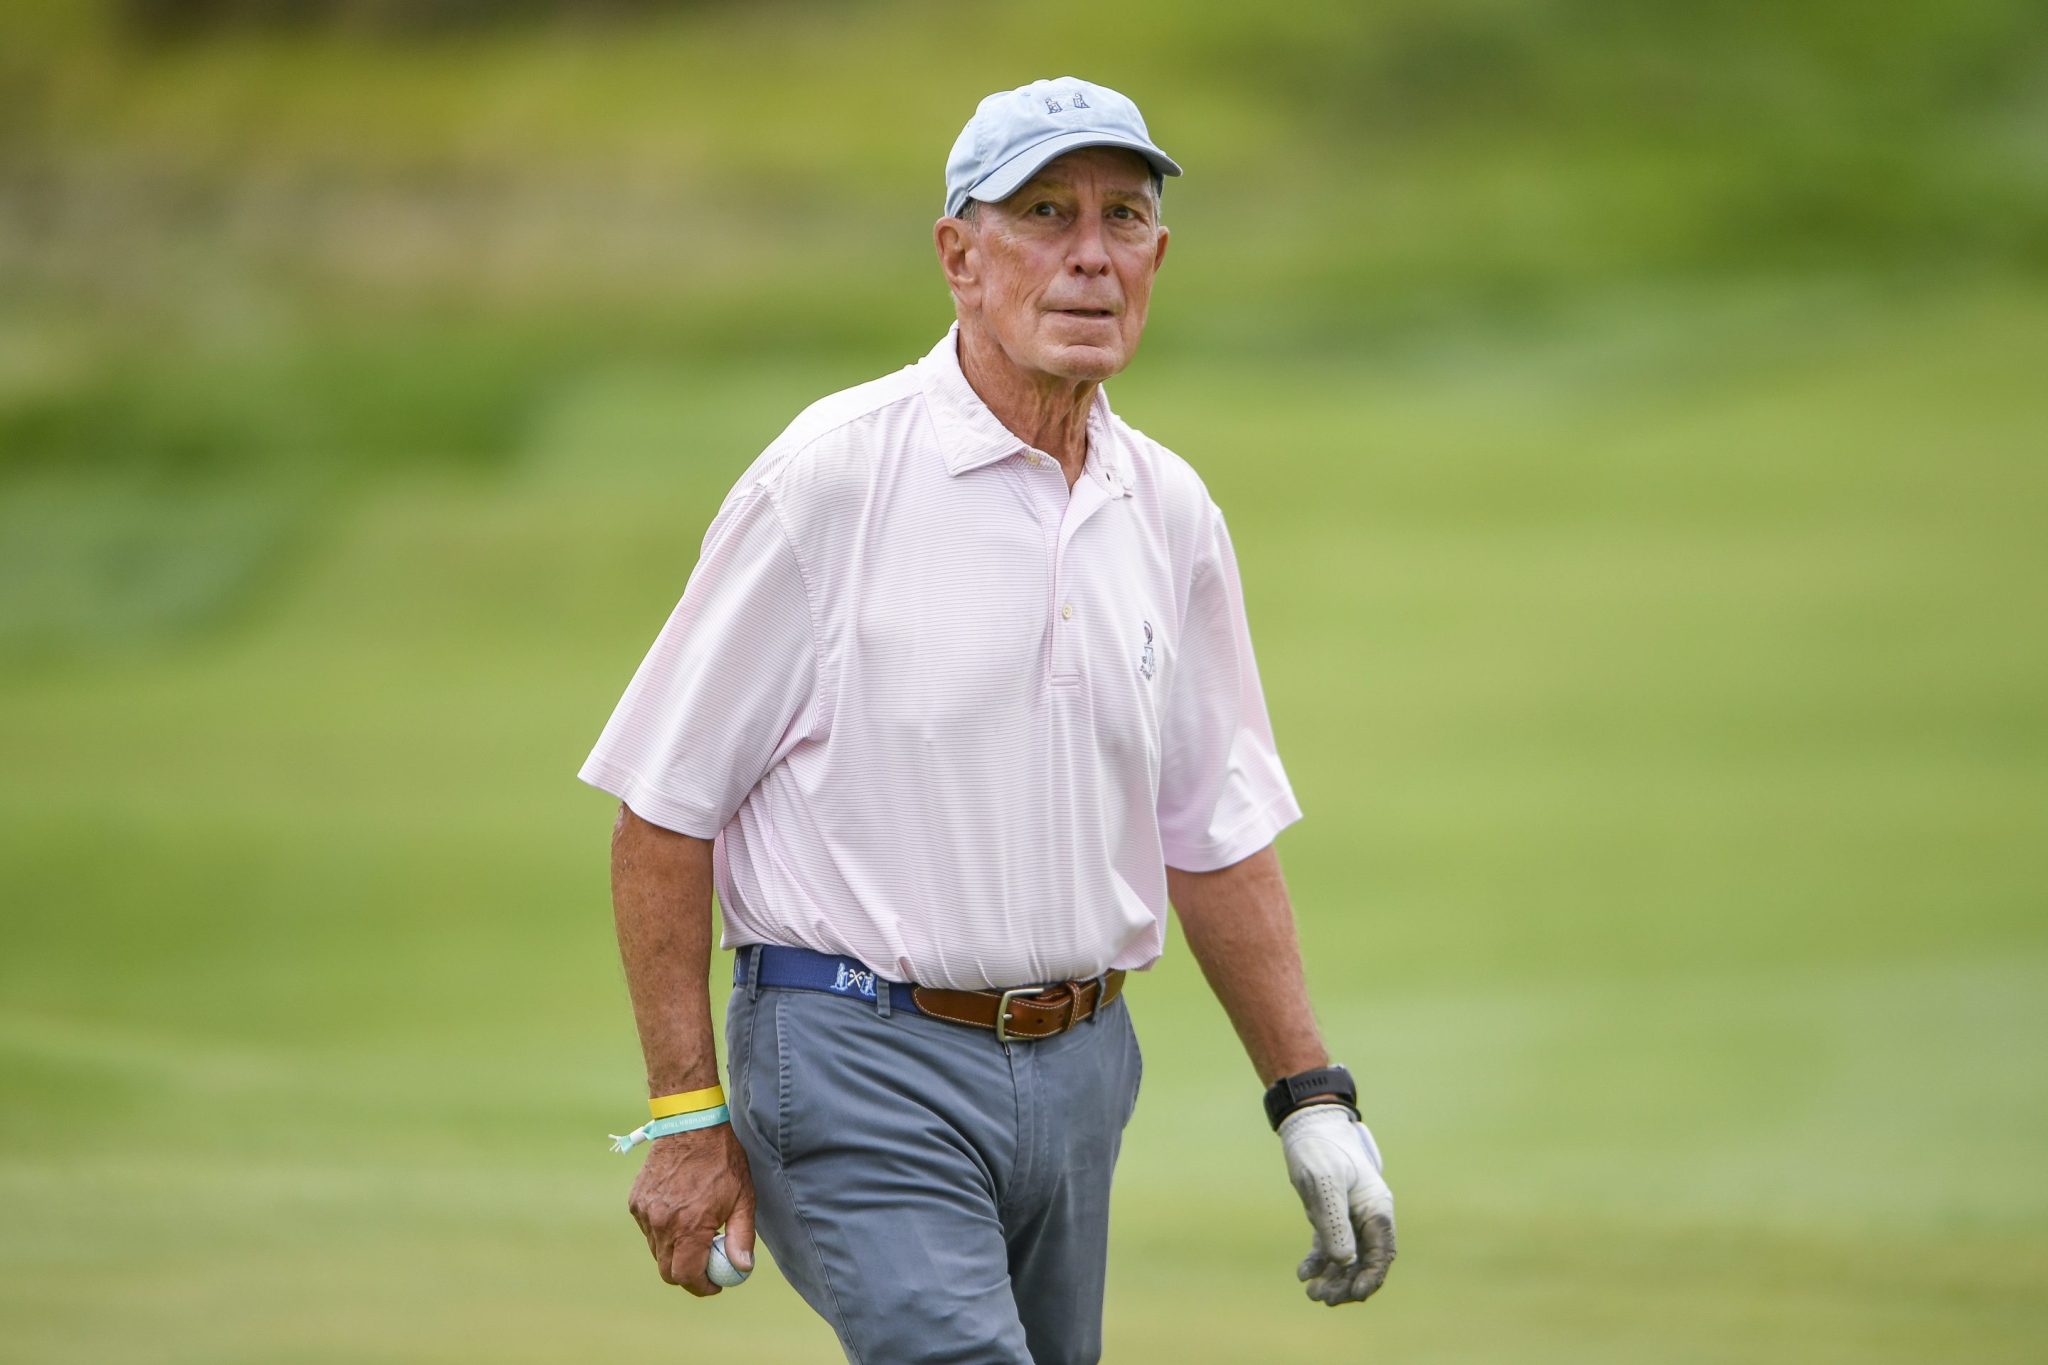 Mike Bloomberg claims remote workers are playing golf